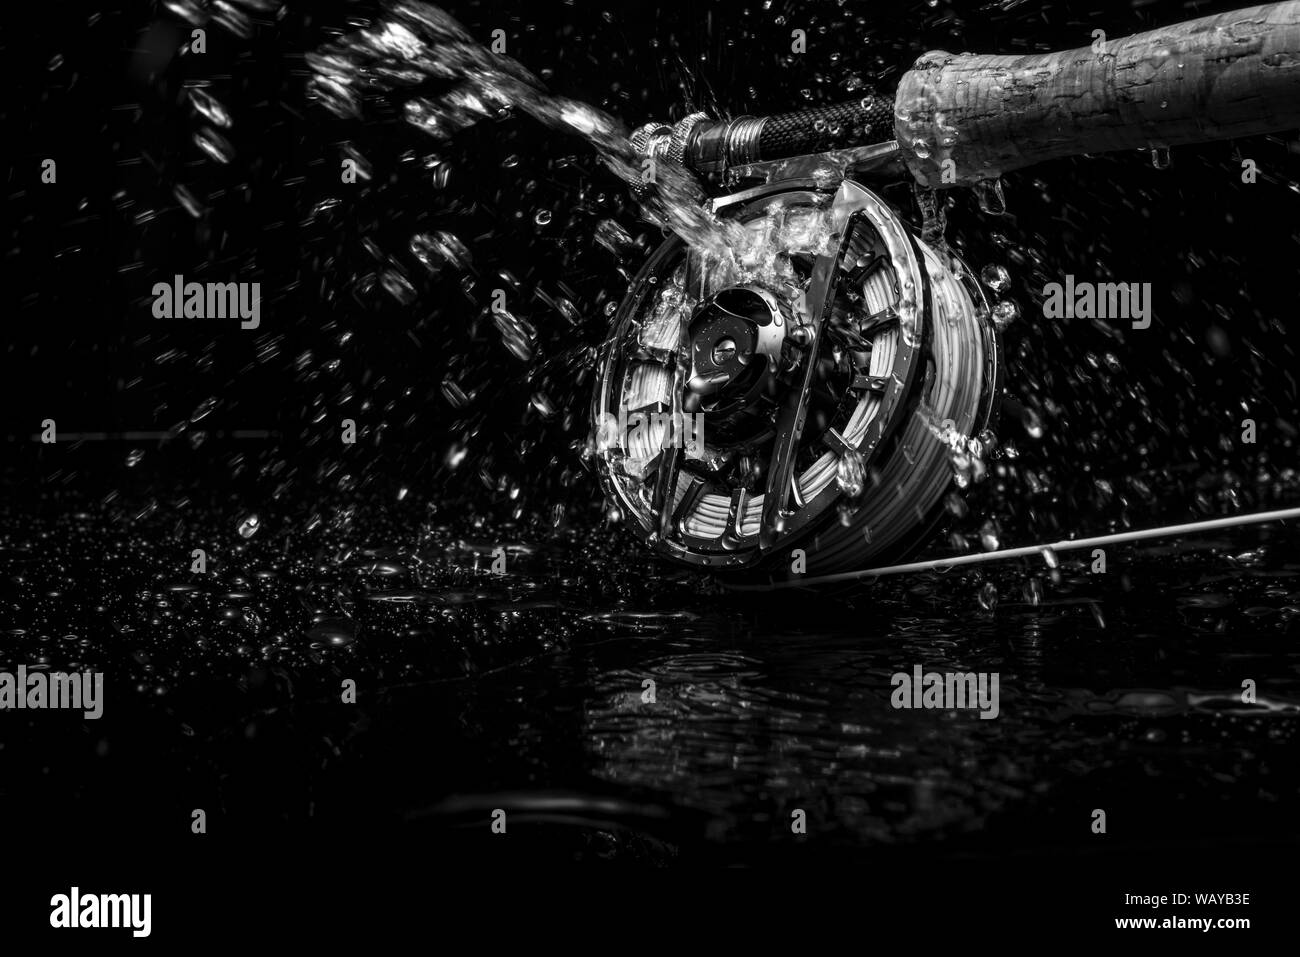 Fly fishing rod and reel with water spray on black in black and white Stock Photo